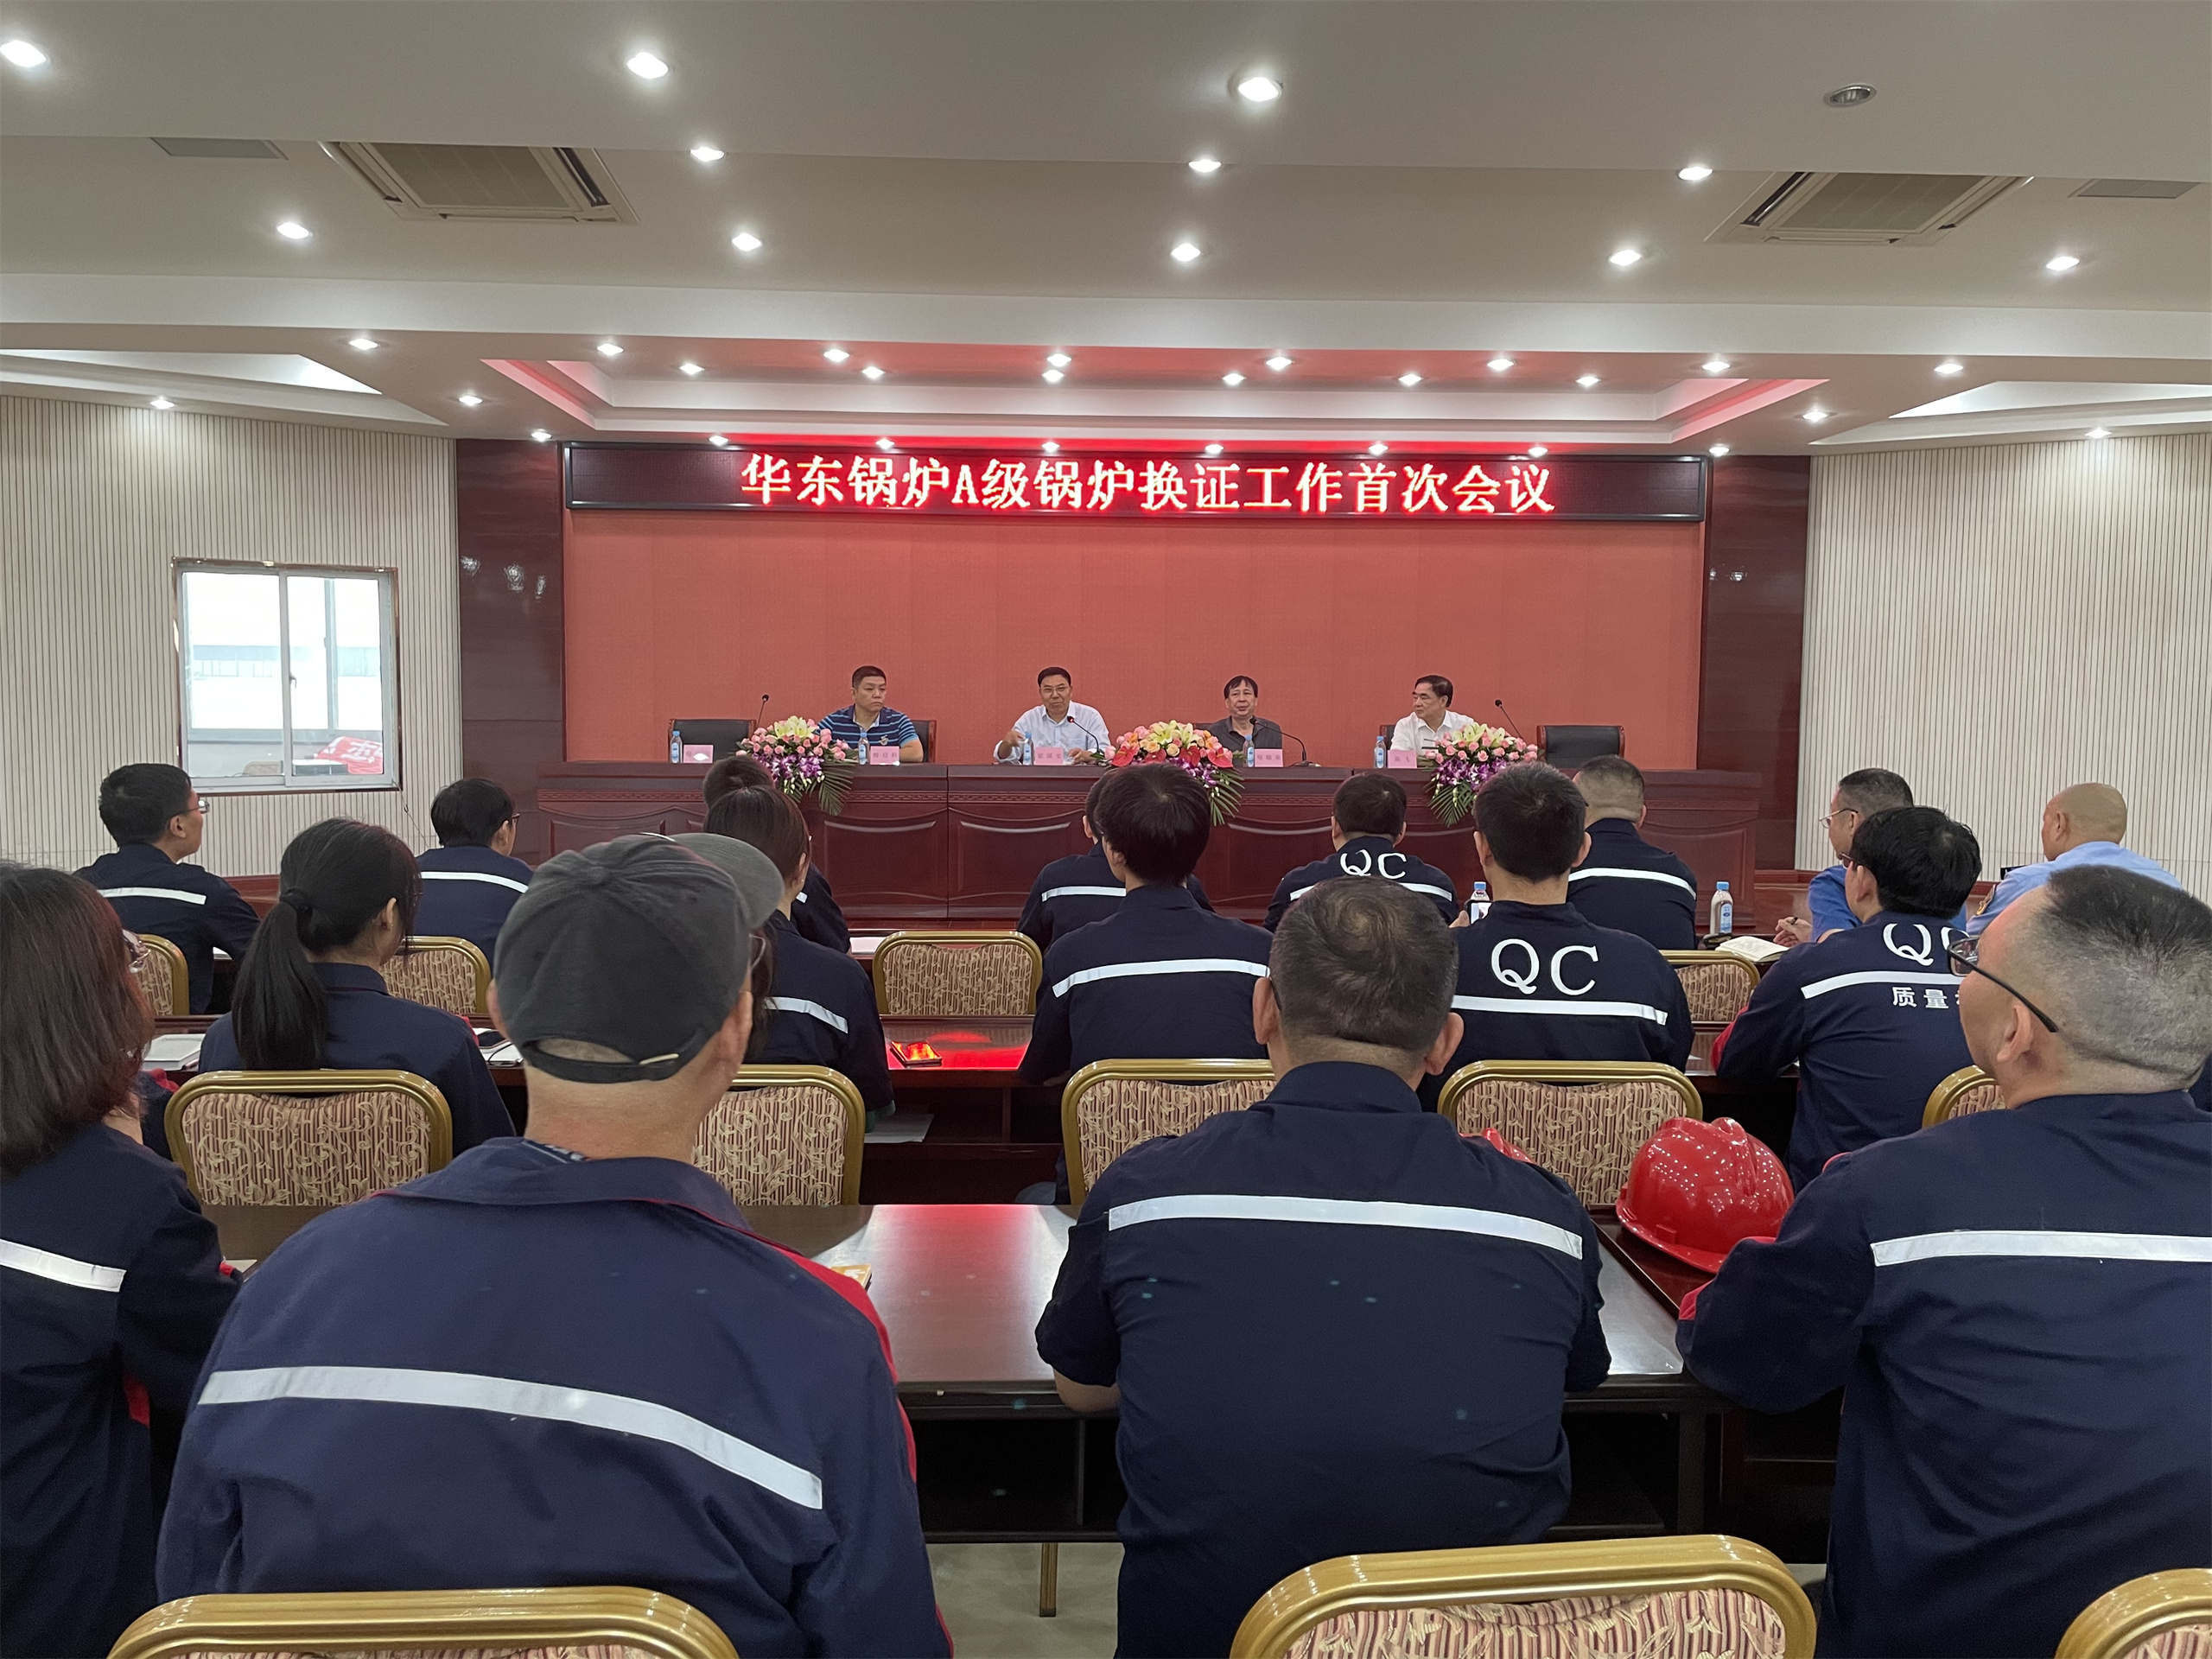 Congratulate the successful completion of the Grade A Boiler renewal evaluation of Huadong Boiler